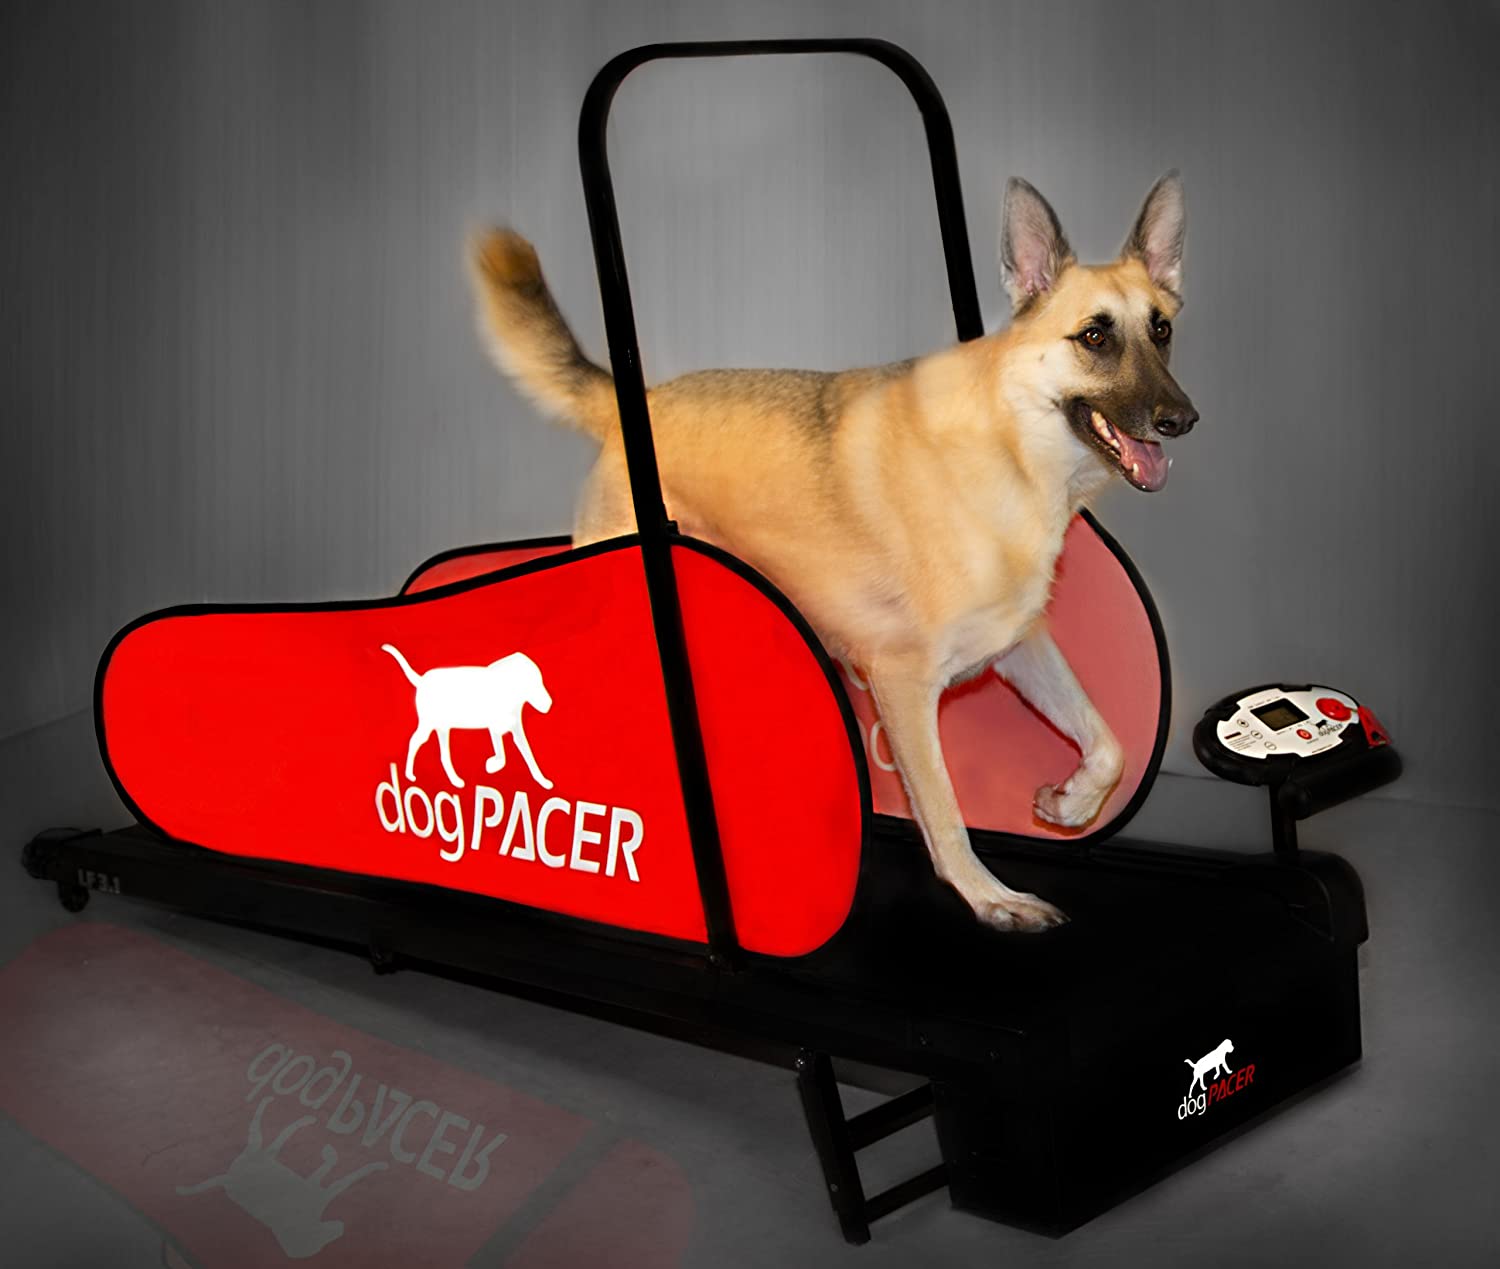 The dogPACER LF 31 Treadmill